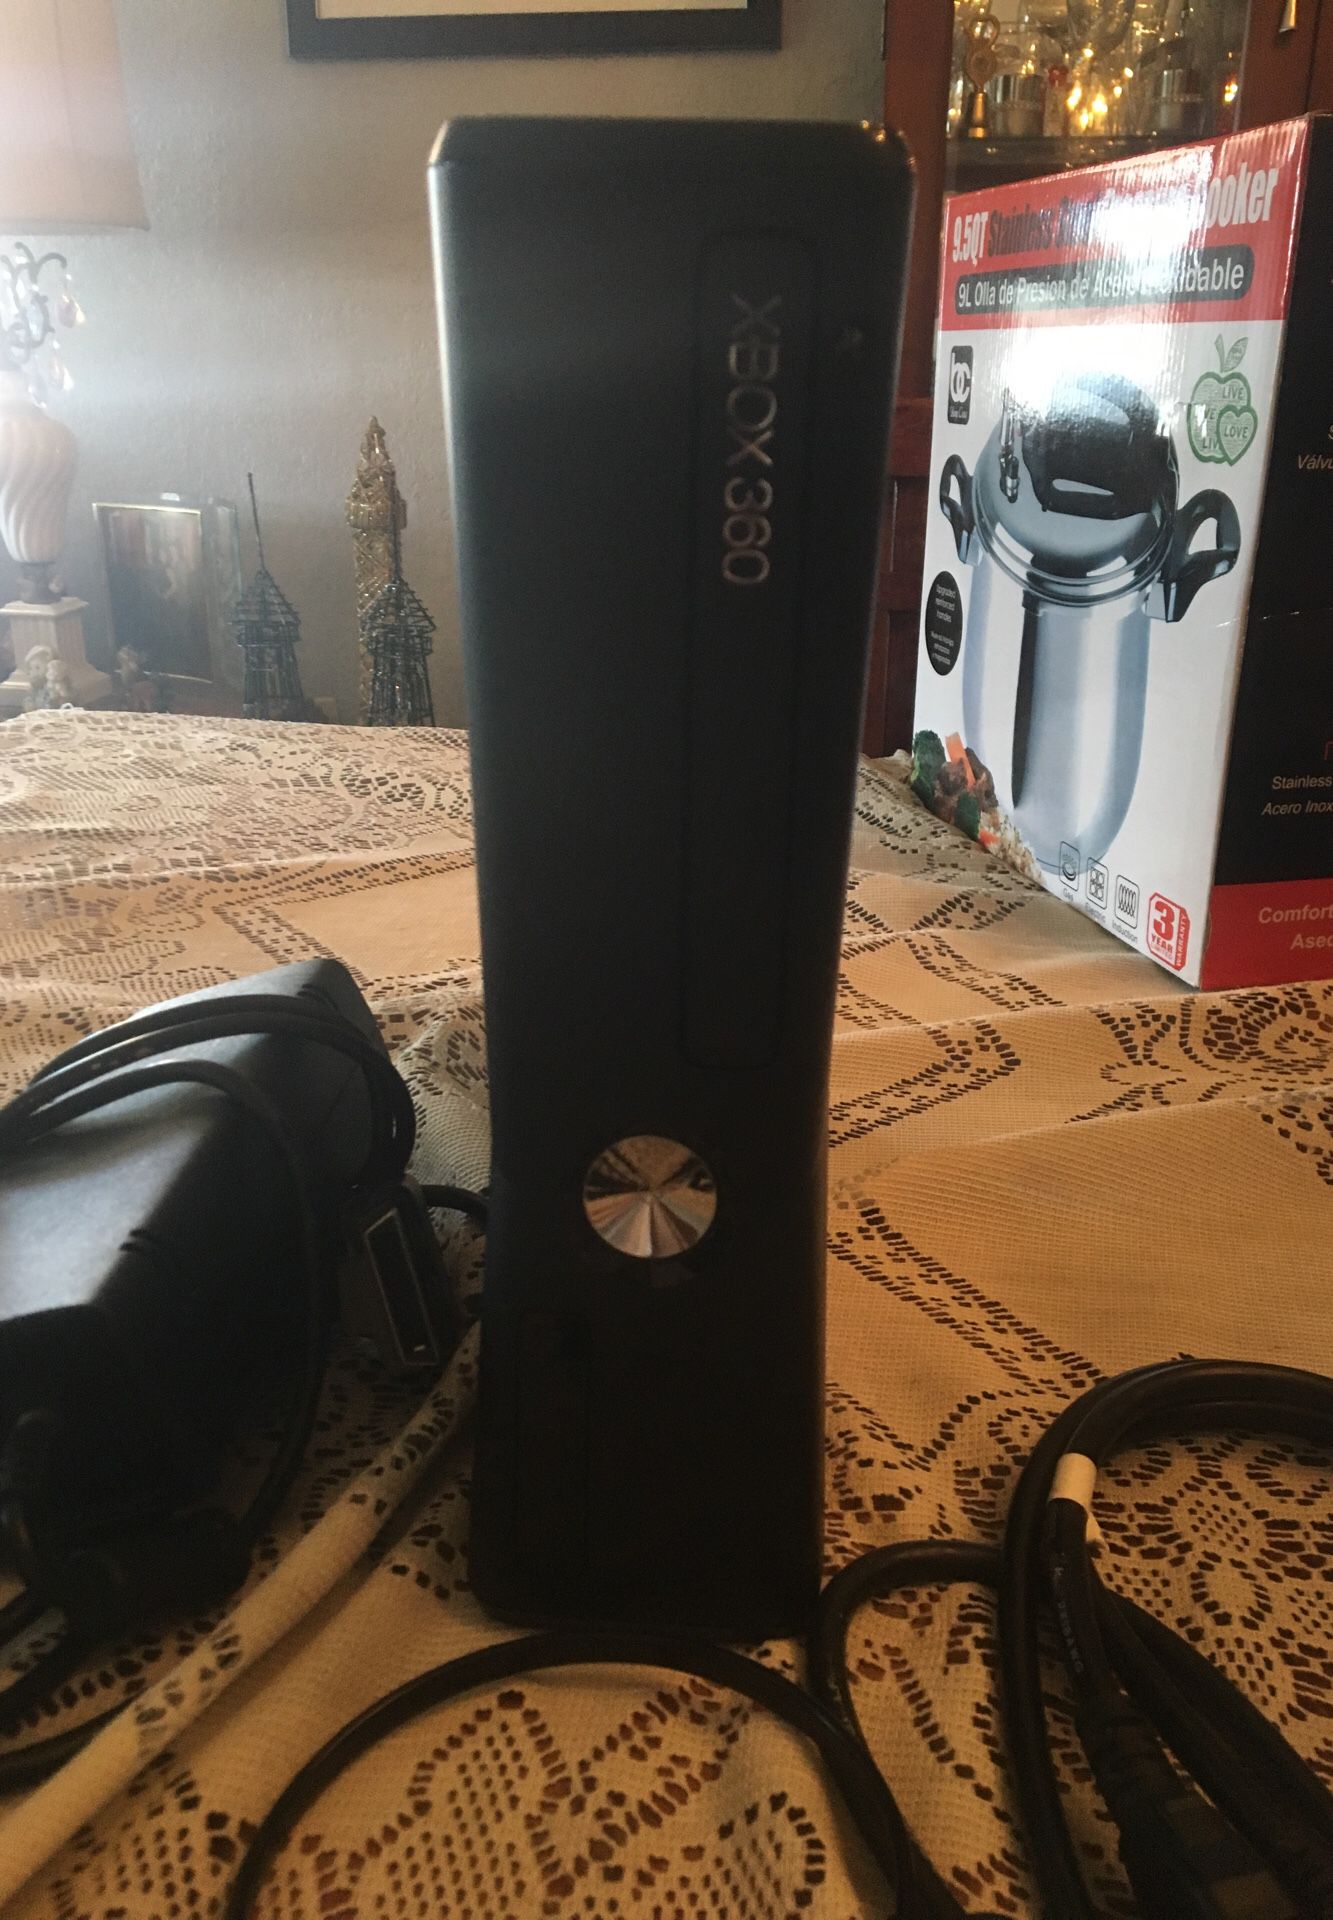 Xbox 360 with two headphones for online playing